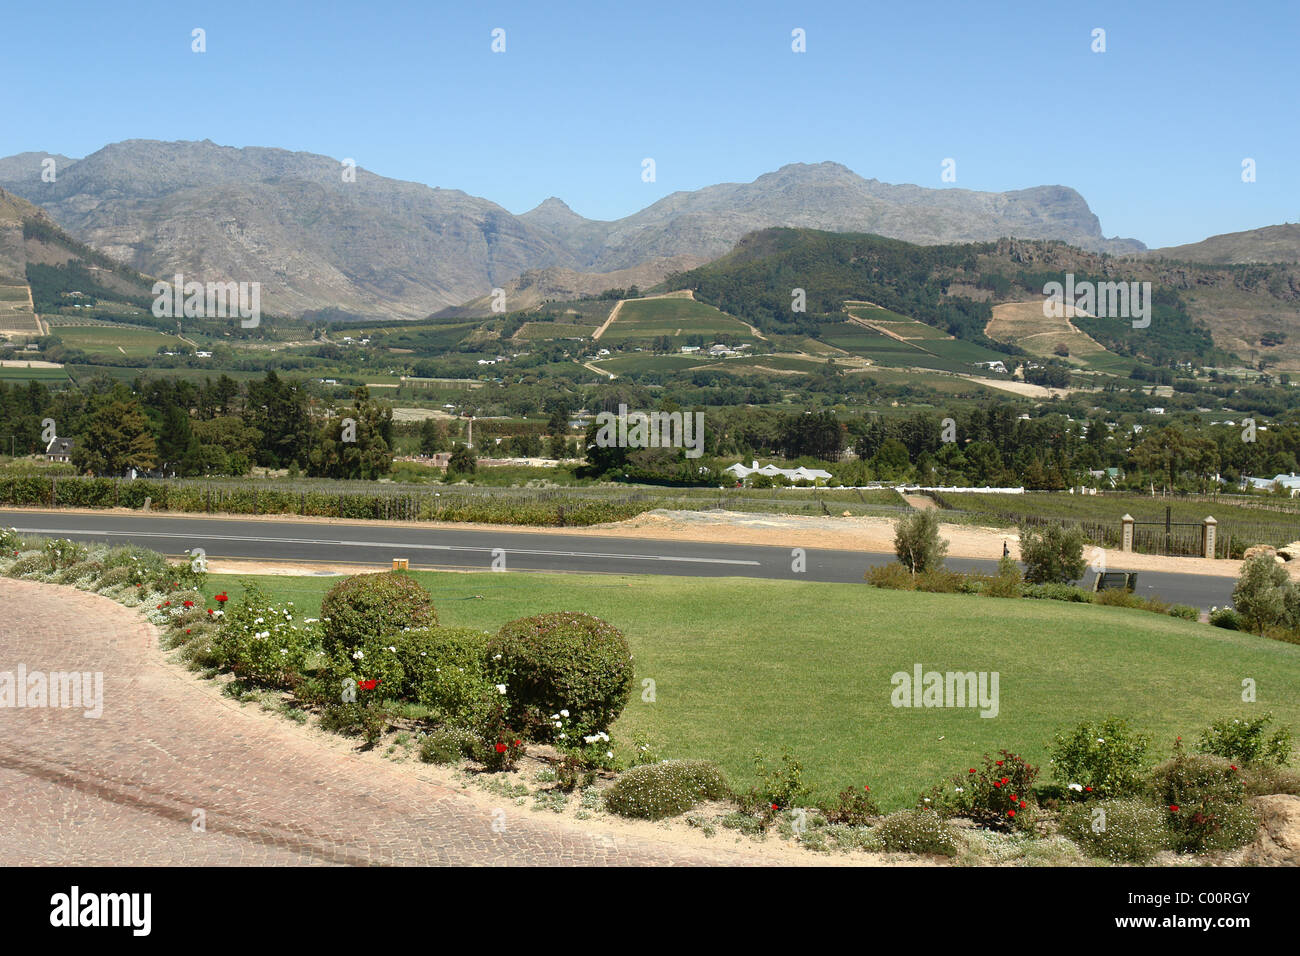 View over valley with winery in foreground in Franschoek, South Africa Stock Photo